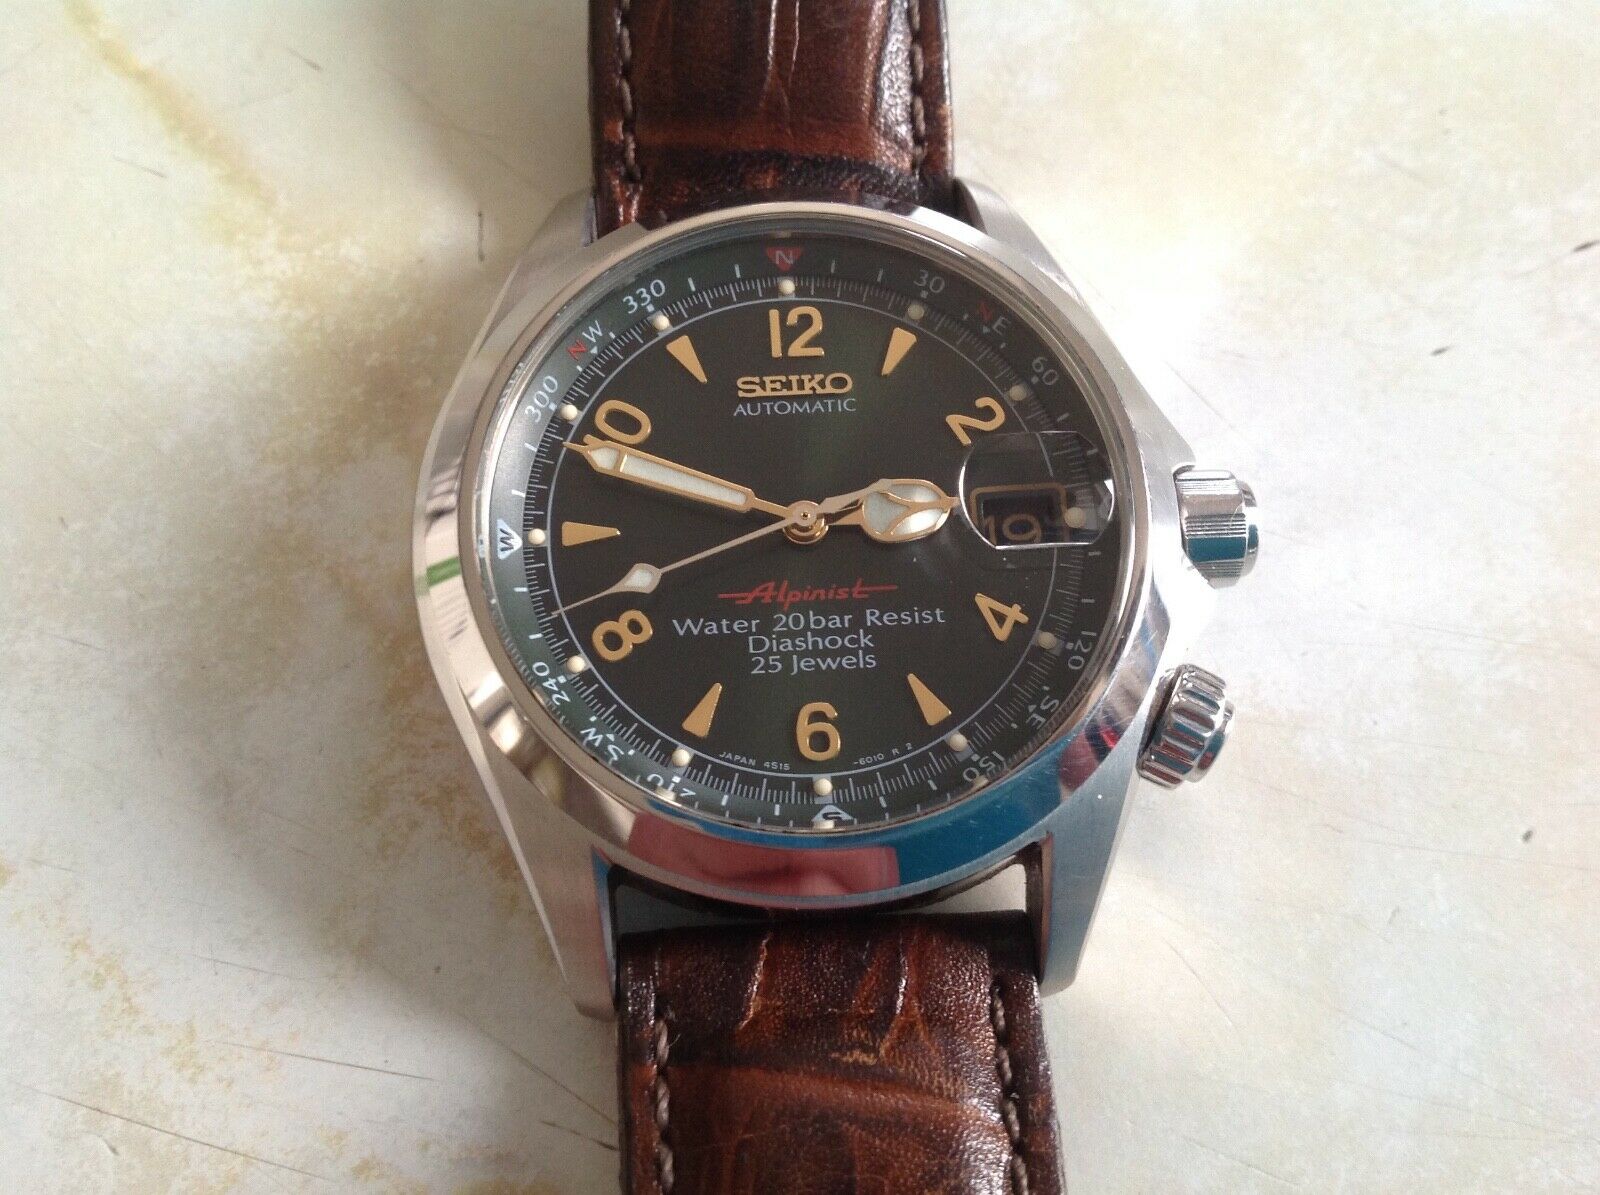 Seiko Alpinist 'Red' Watch - SCVF009 - Green Dial - Freshly Serviced Holy  Grail | WatchCharts